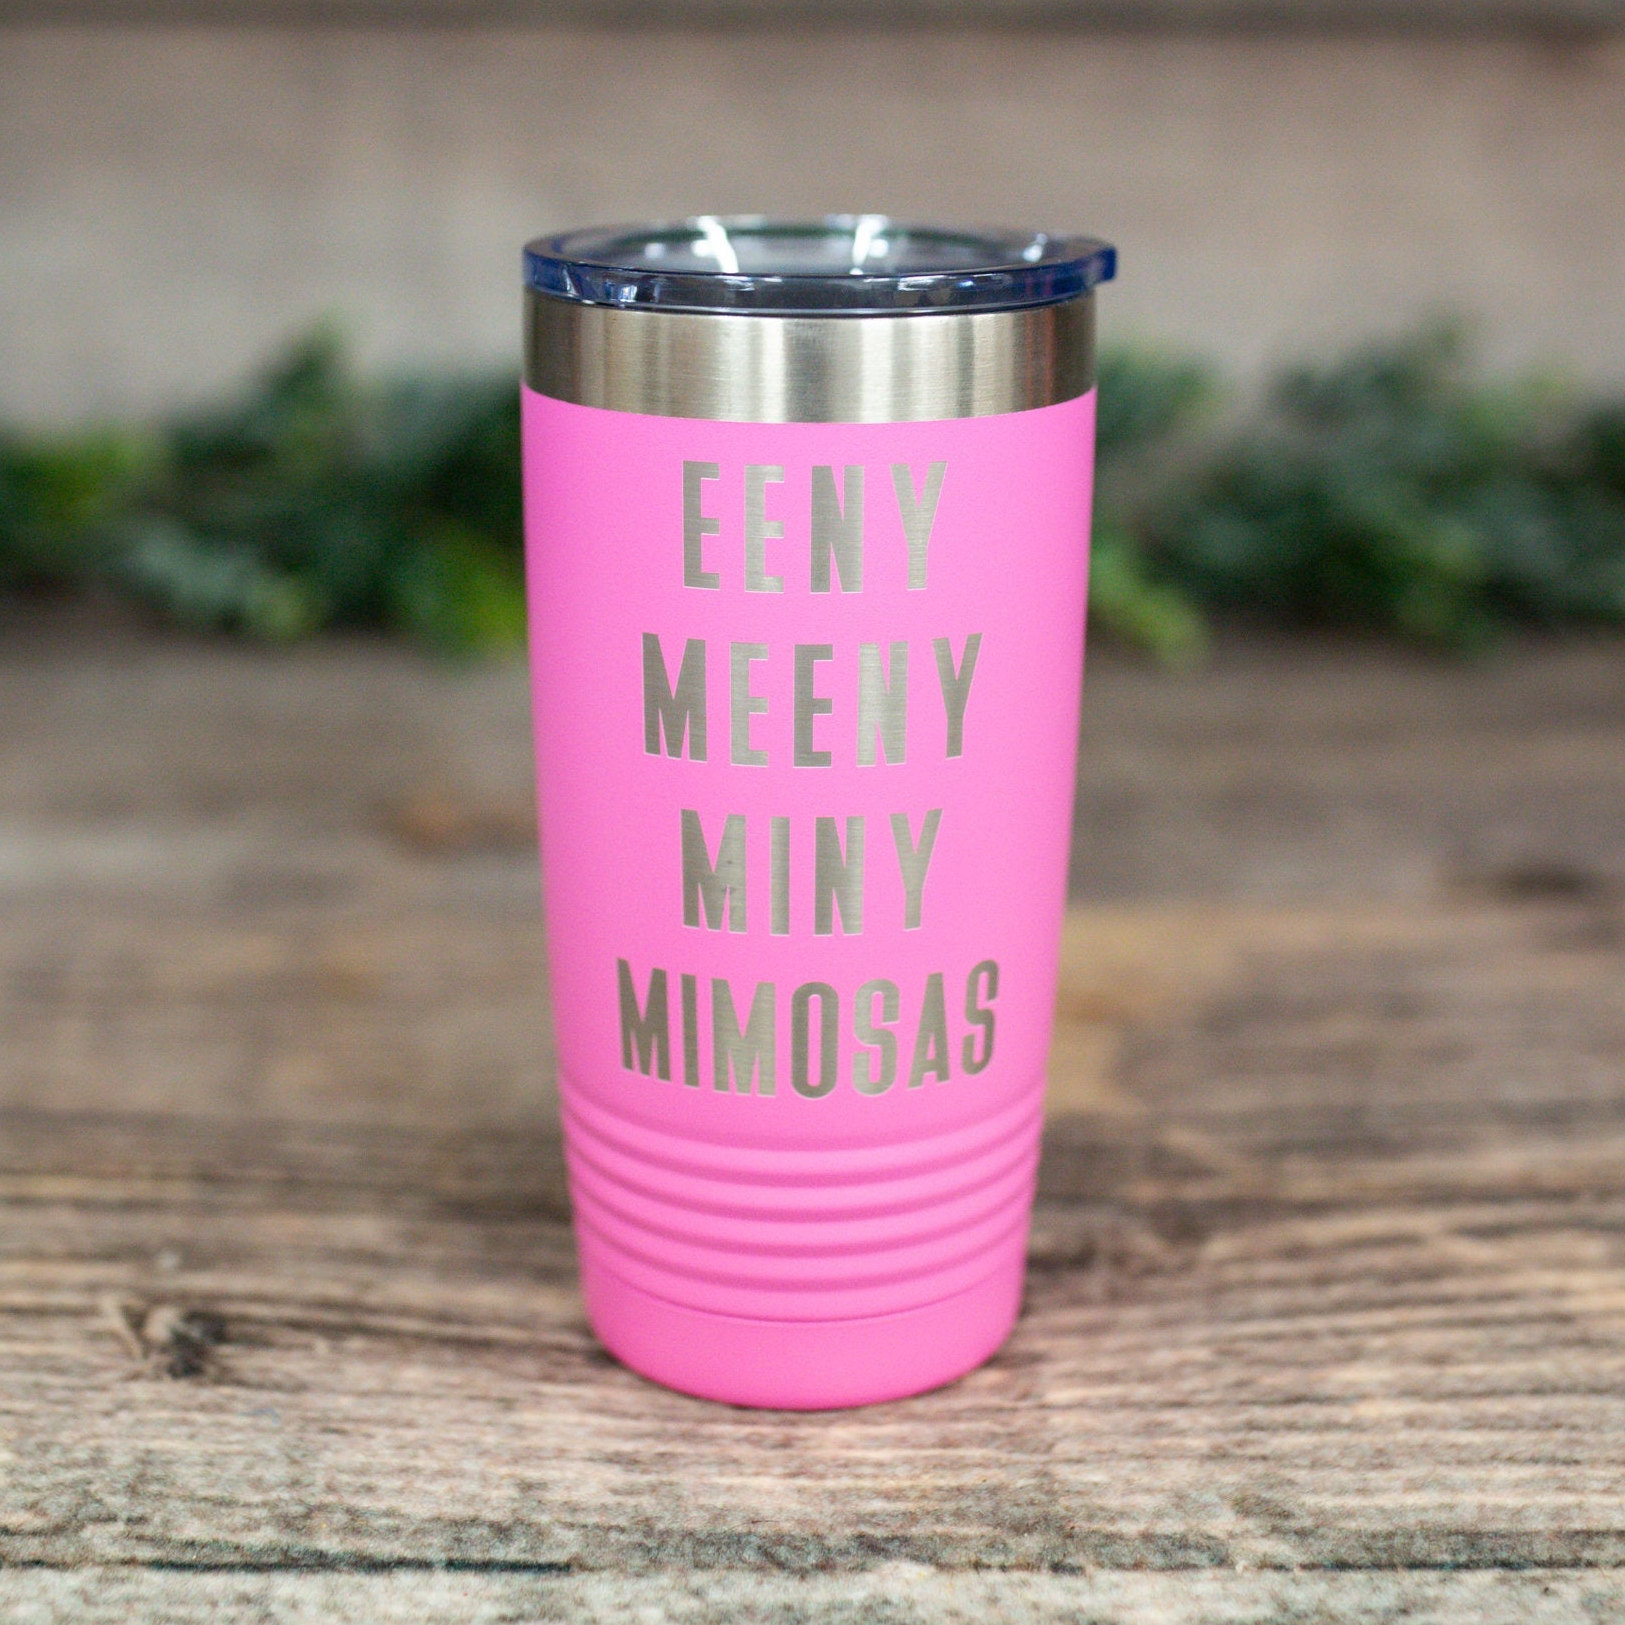 https://3cetching.com/wp-content/uploads/2021/07/eeny-meeny-miny-mimosas-engraved-tumbler-vacuum-insulated-tumbler-mixed-drink-tumbler-60f79a36.jpg